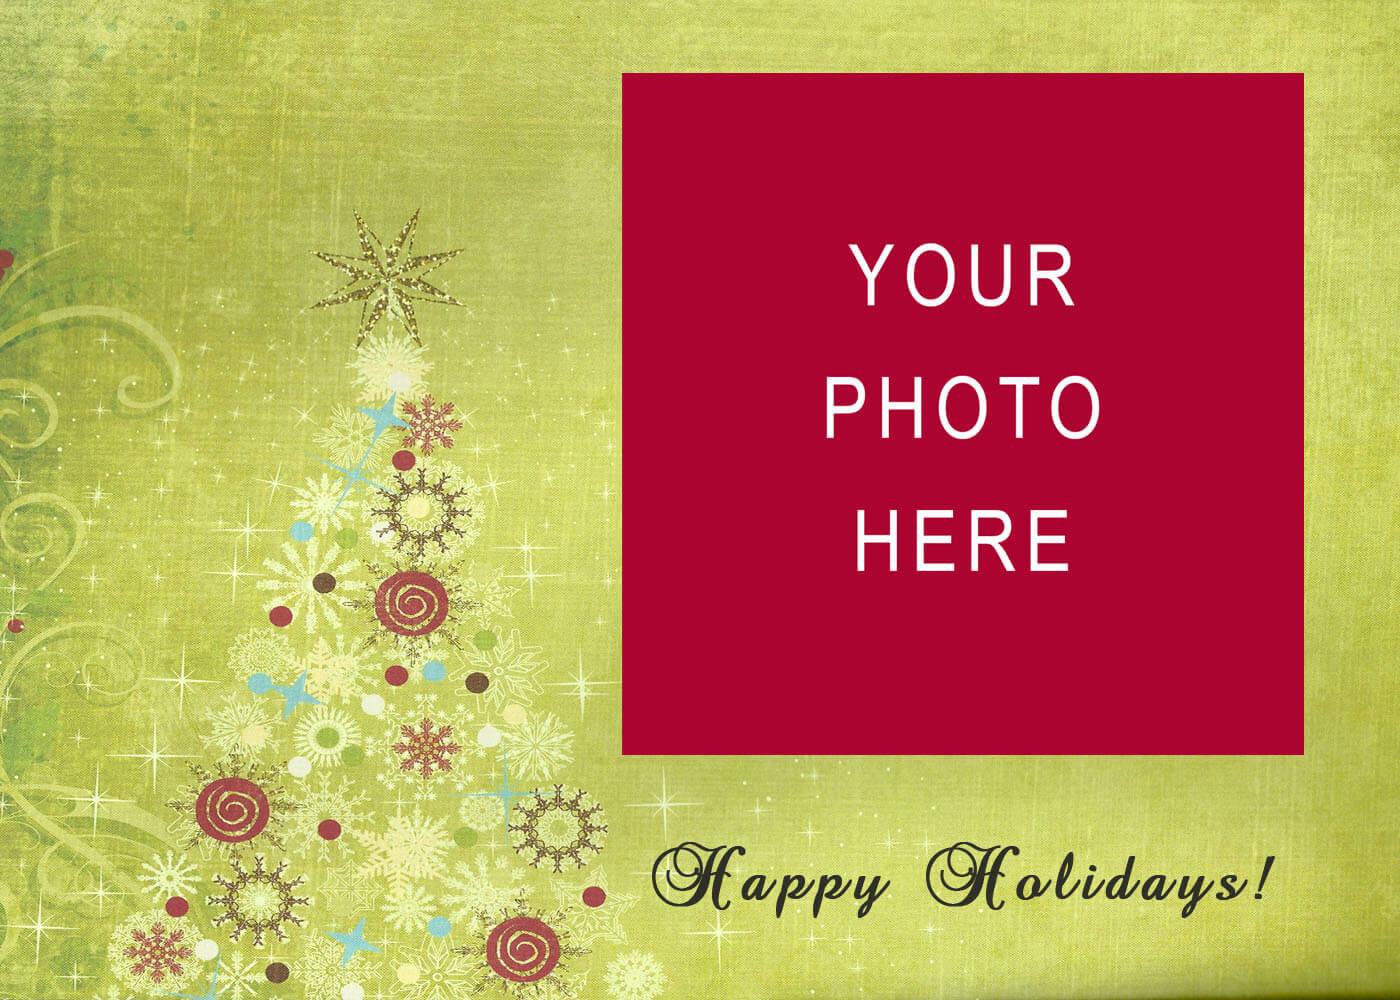 11 Christmas Card Templates Free Download Images – Christmas With Christmas Photo Cards Templates Free Downloads